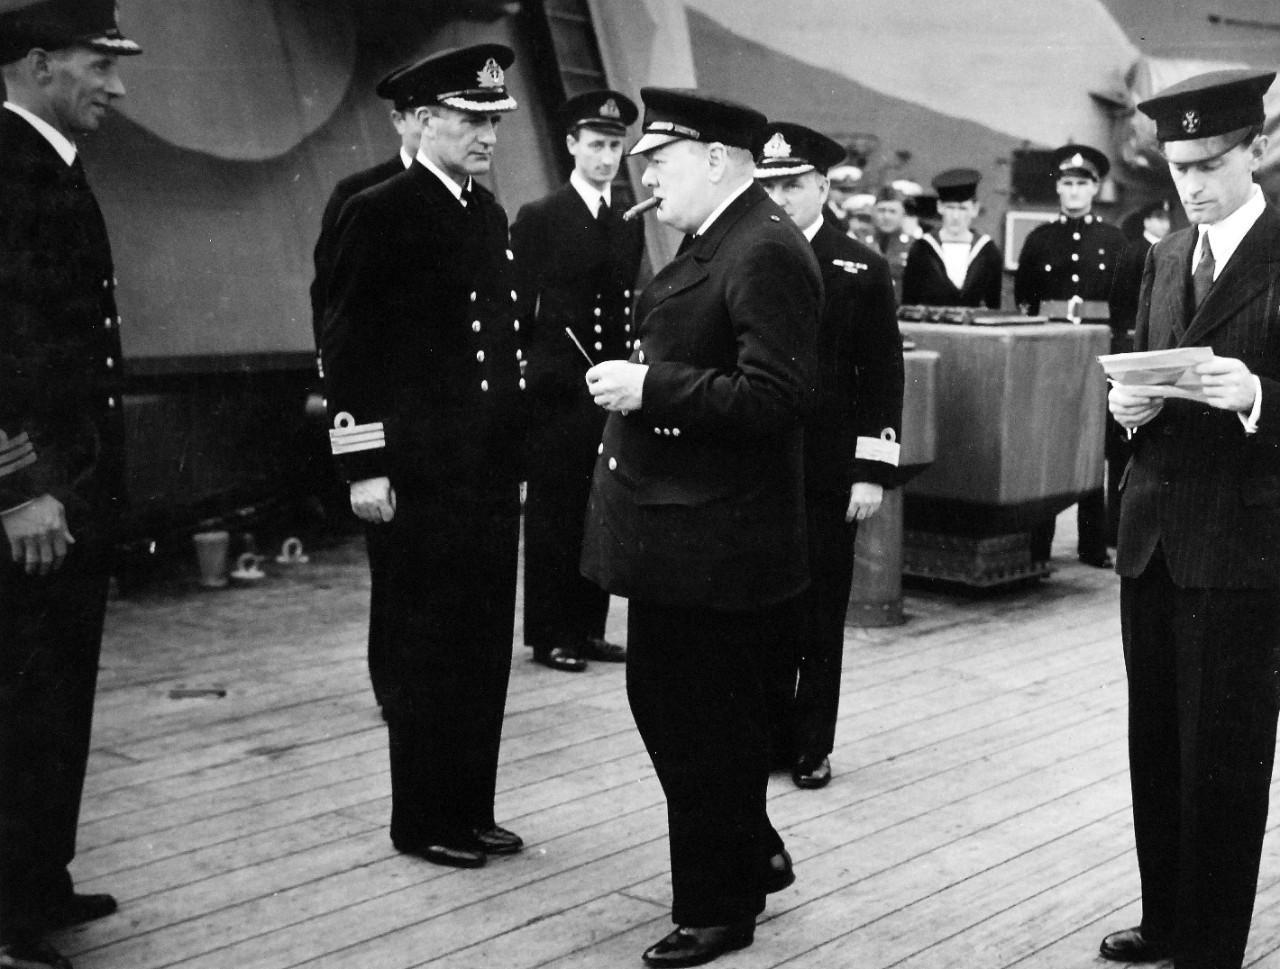 80-G-26872: Atlantic Charter, August 1941.  Prime Minister Churchill shown during ceremonies onboard HMS Prince of Wales during the Atlantic Charter.    Photograph released August 1941.   Official U.S. Navy Photograph, now in the collections of the National Archives.  (2016/03/22).